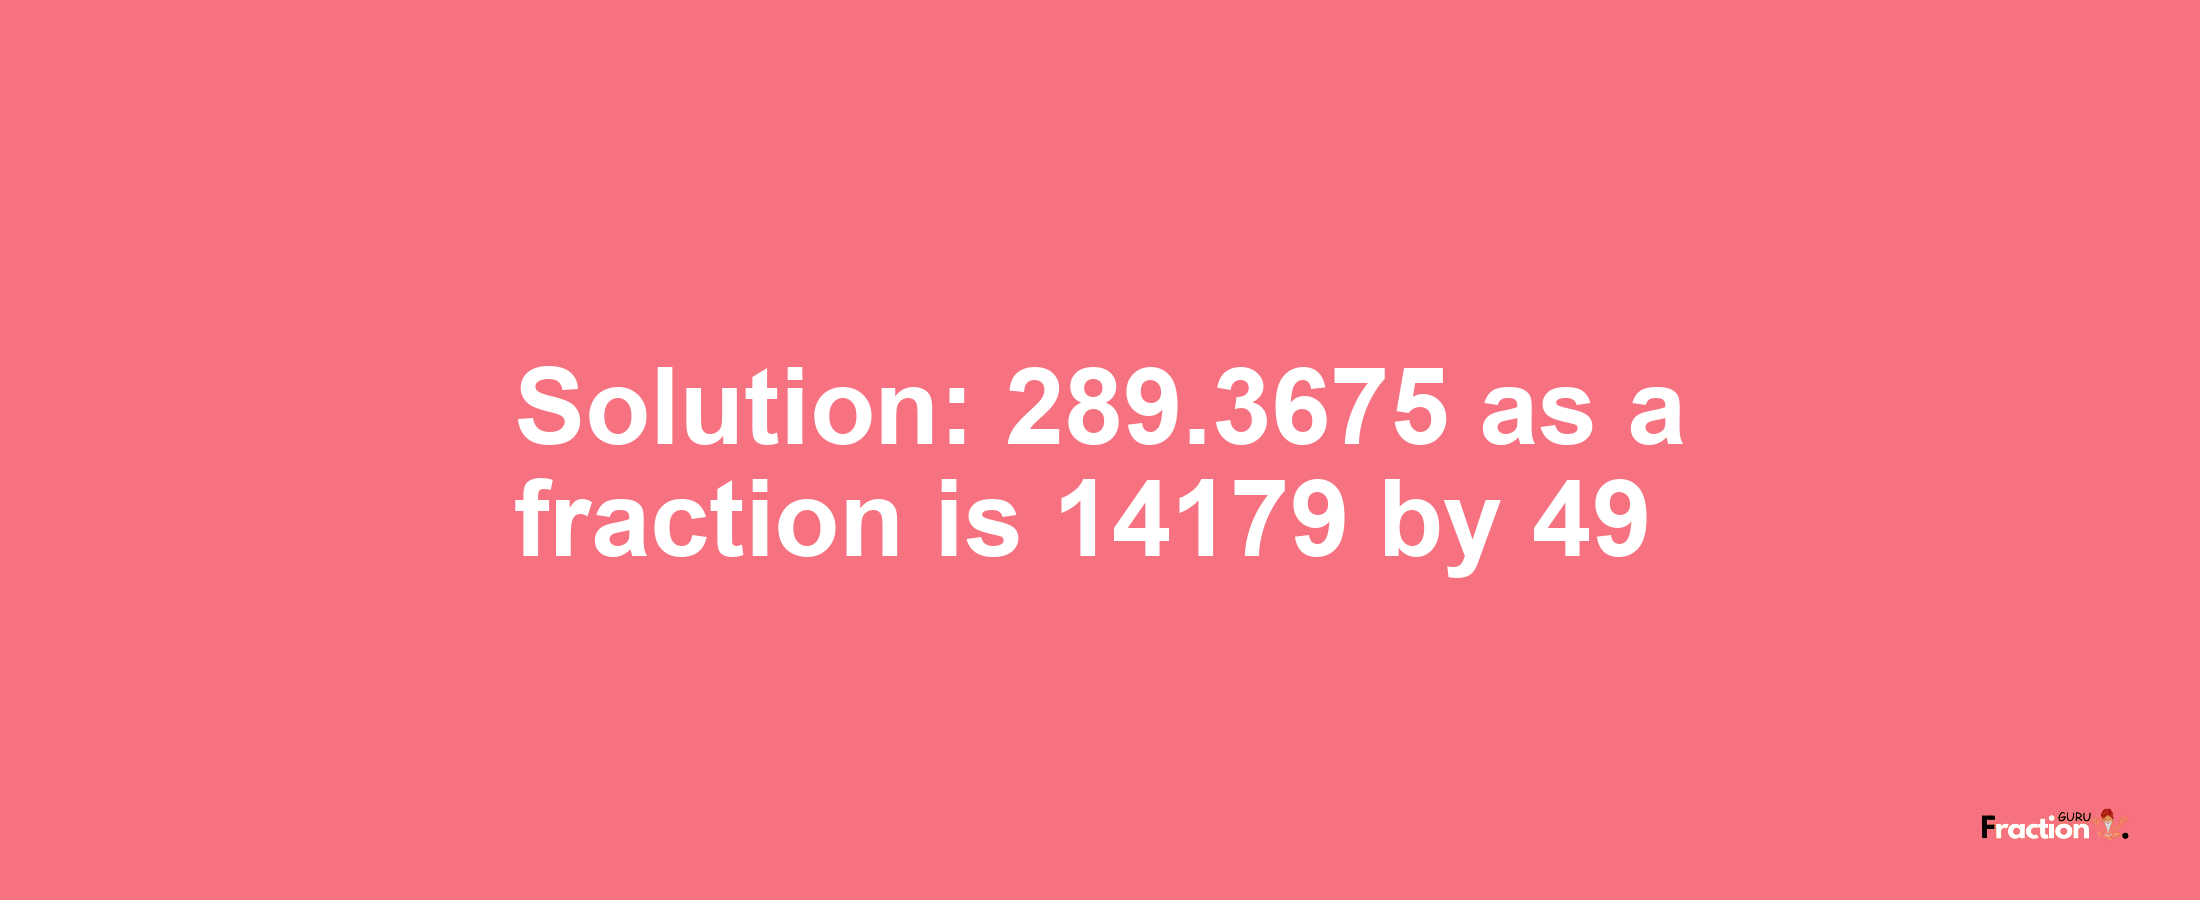 Solution:289.3675 as a fraction is 14179/49